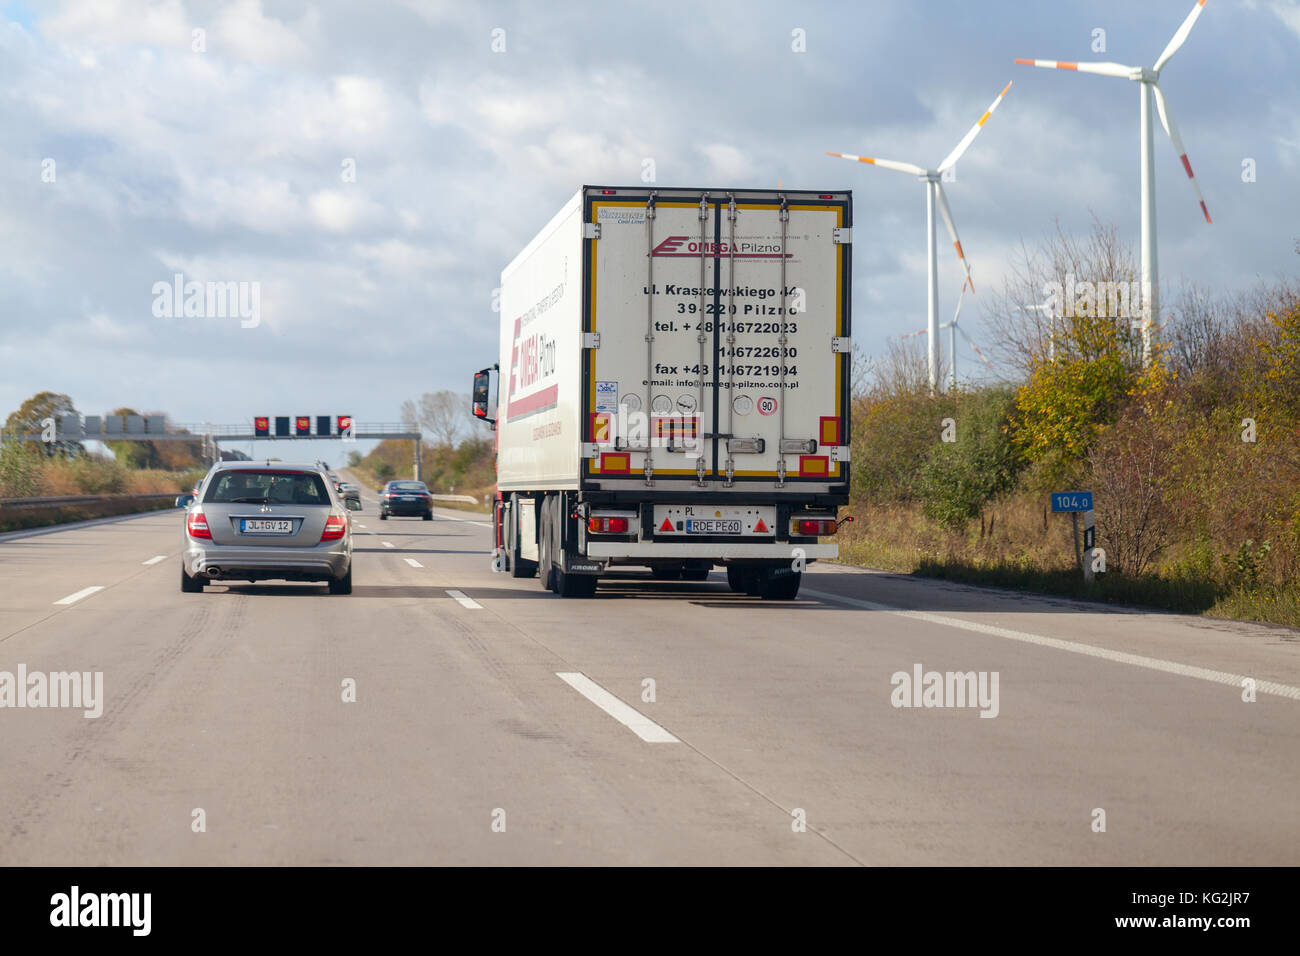 BRAUNSCHWEIG / GERMANY - OCTOBER 29, 2017: truck from polish forwarder Omega Pilzno drives on  german motorway A2. Stock Photo